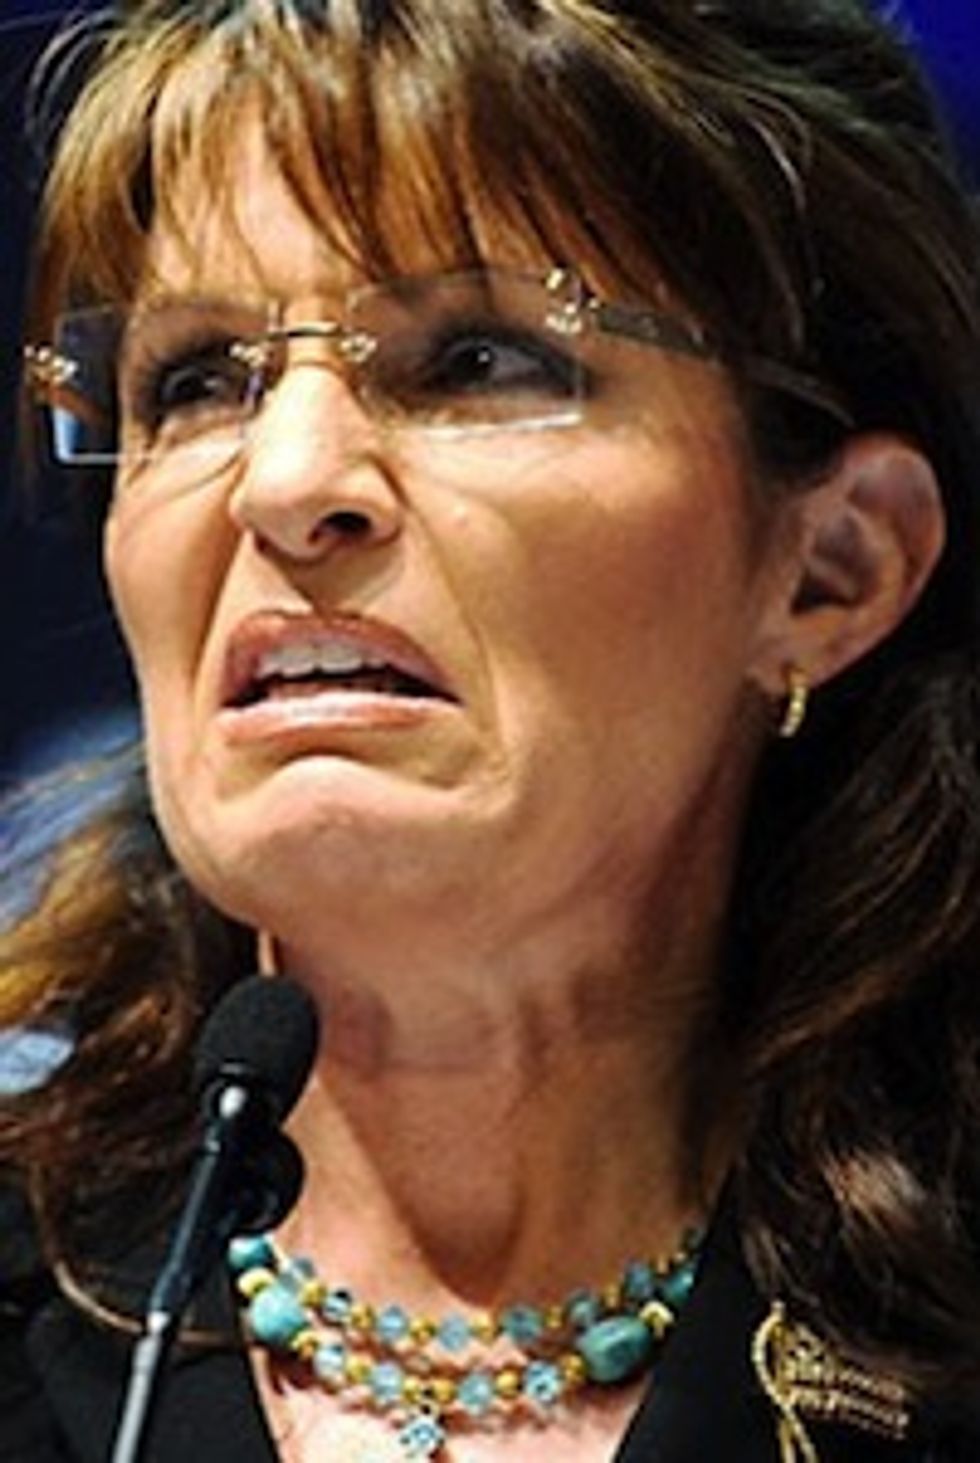 Alaska Teabaggers Find Exciting Fresh New Face For U.S. Senate (It Is Sarah Palin)